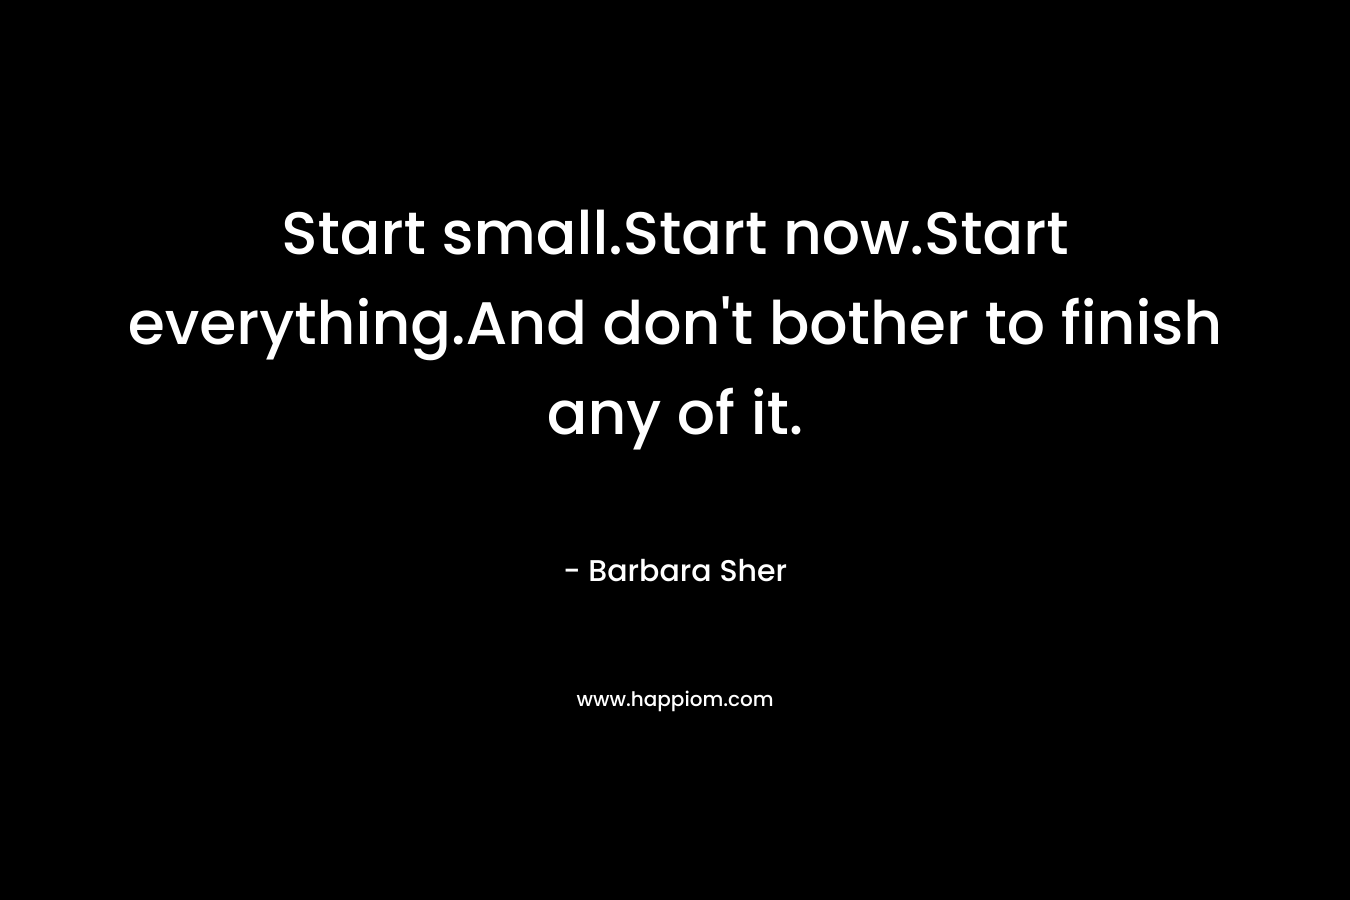 Start small.Start now.Start everything.And don't bother to finish any of it.